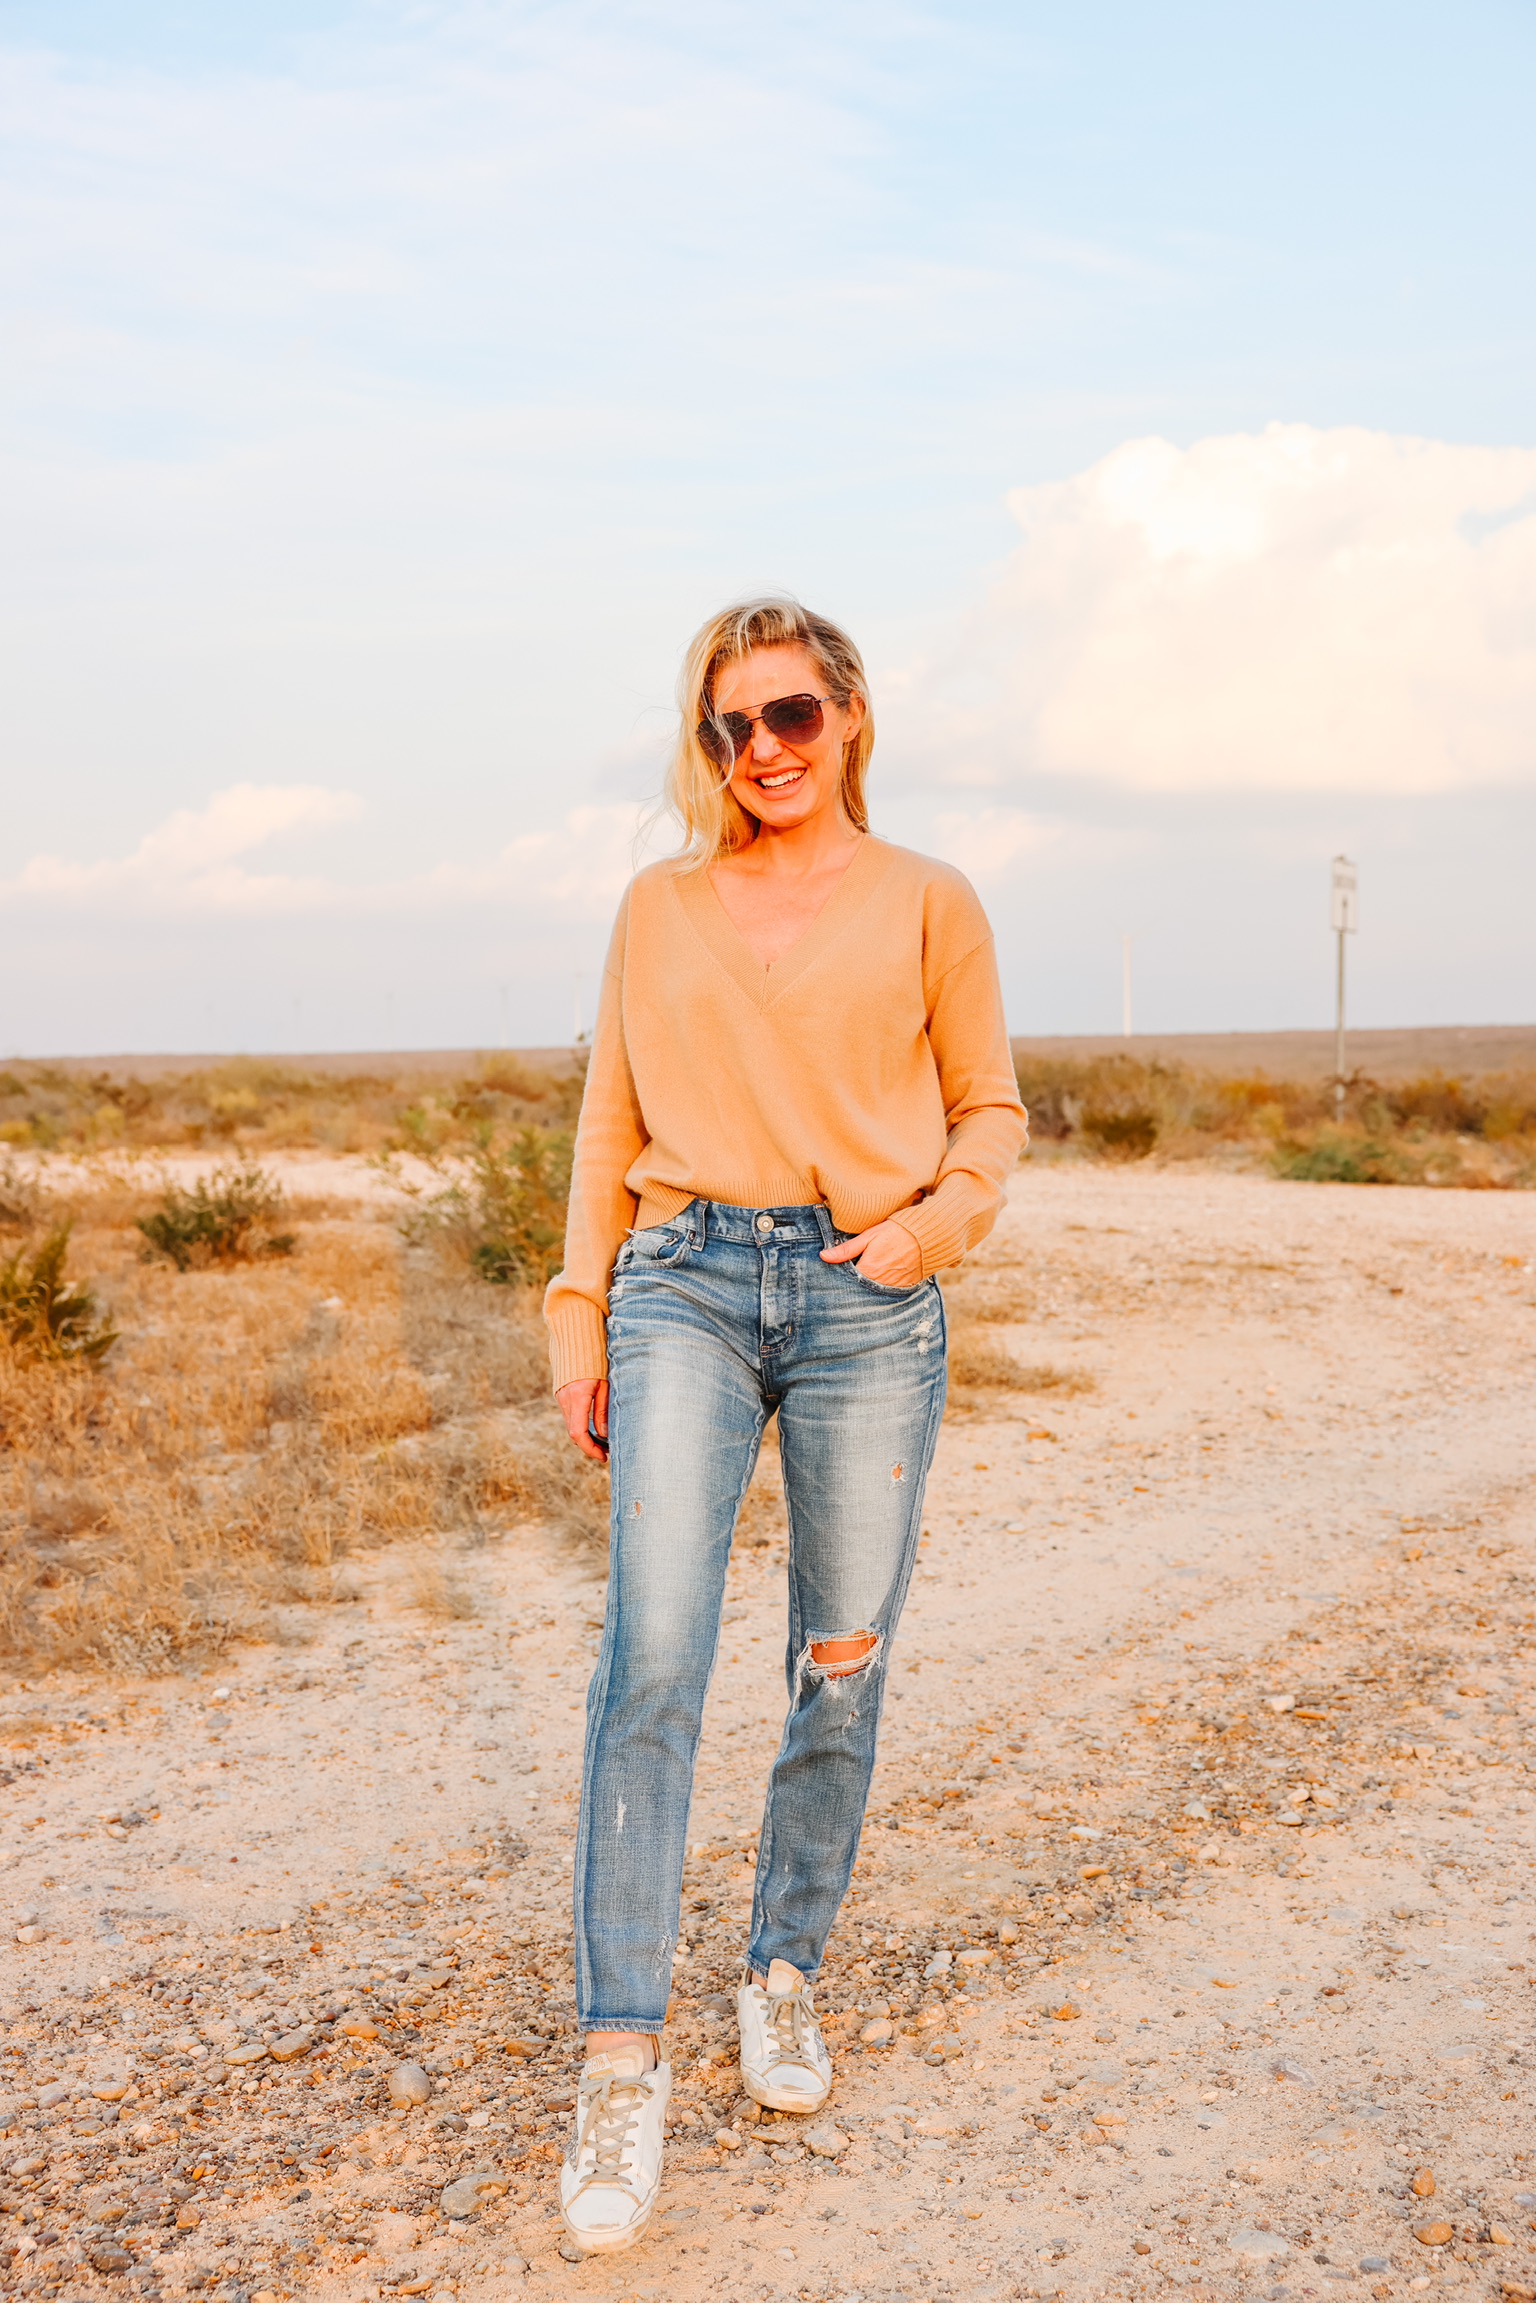 elevated basics, Erin Busbee of Busbee wearing a camel cashmere v-neck sweater from INtermix with distressed skinny jeans by Moussy Vintage and white golden goose sneakers in south Texas